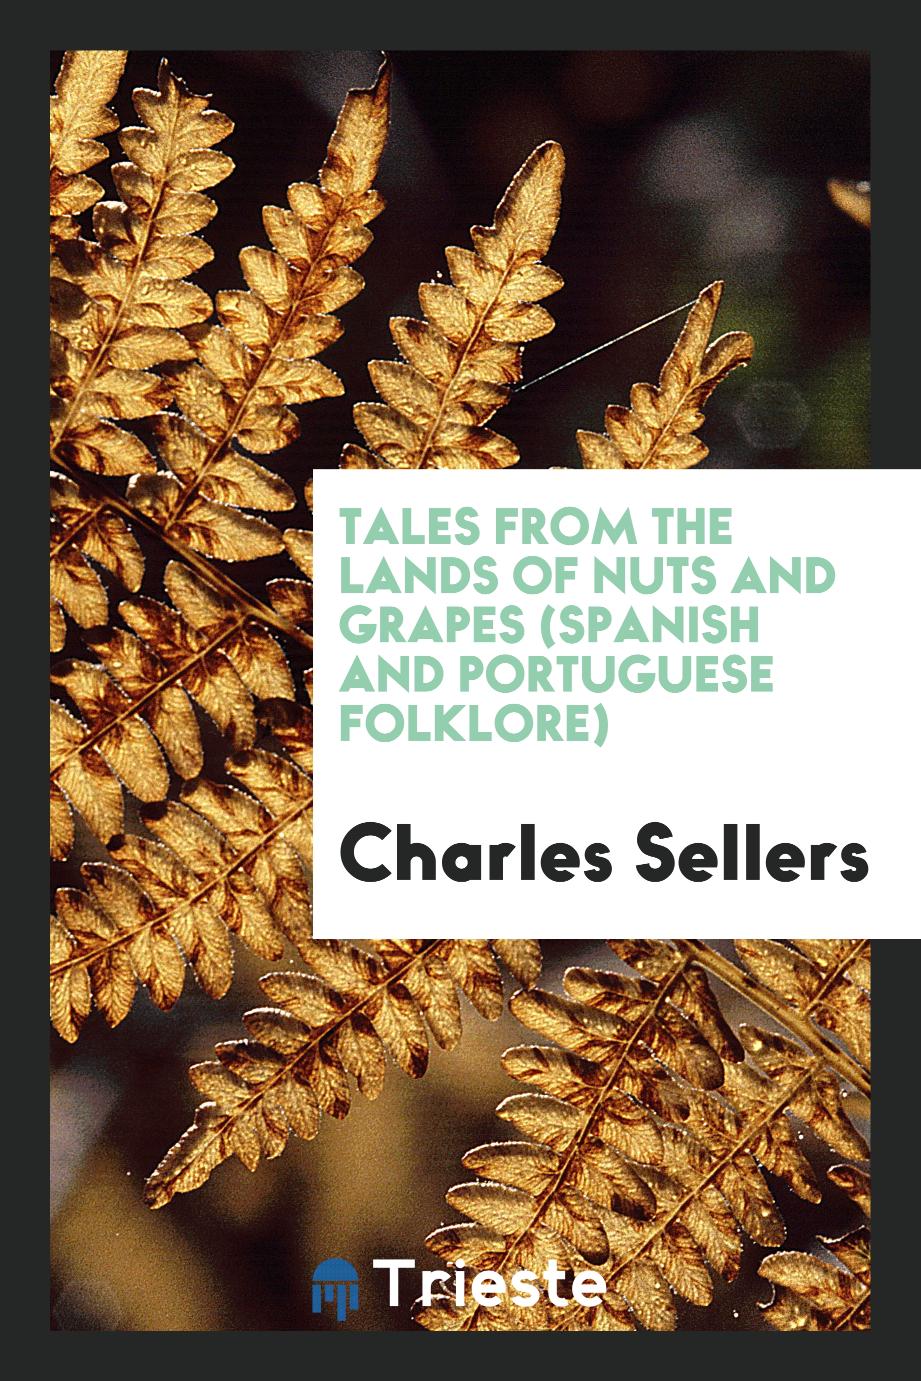 Tales from the lands of nuts and grapes (Spanish and Portuguese folklore)